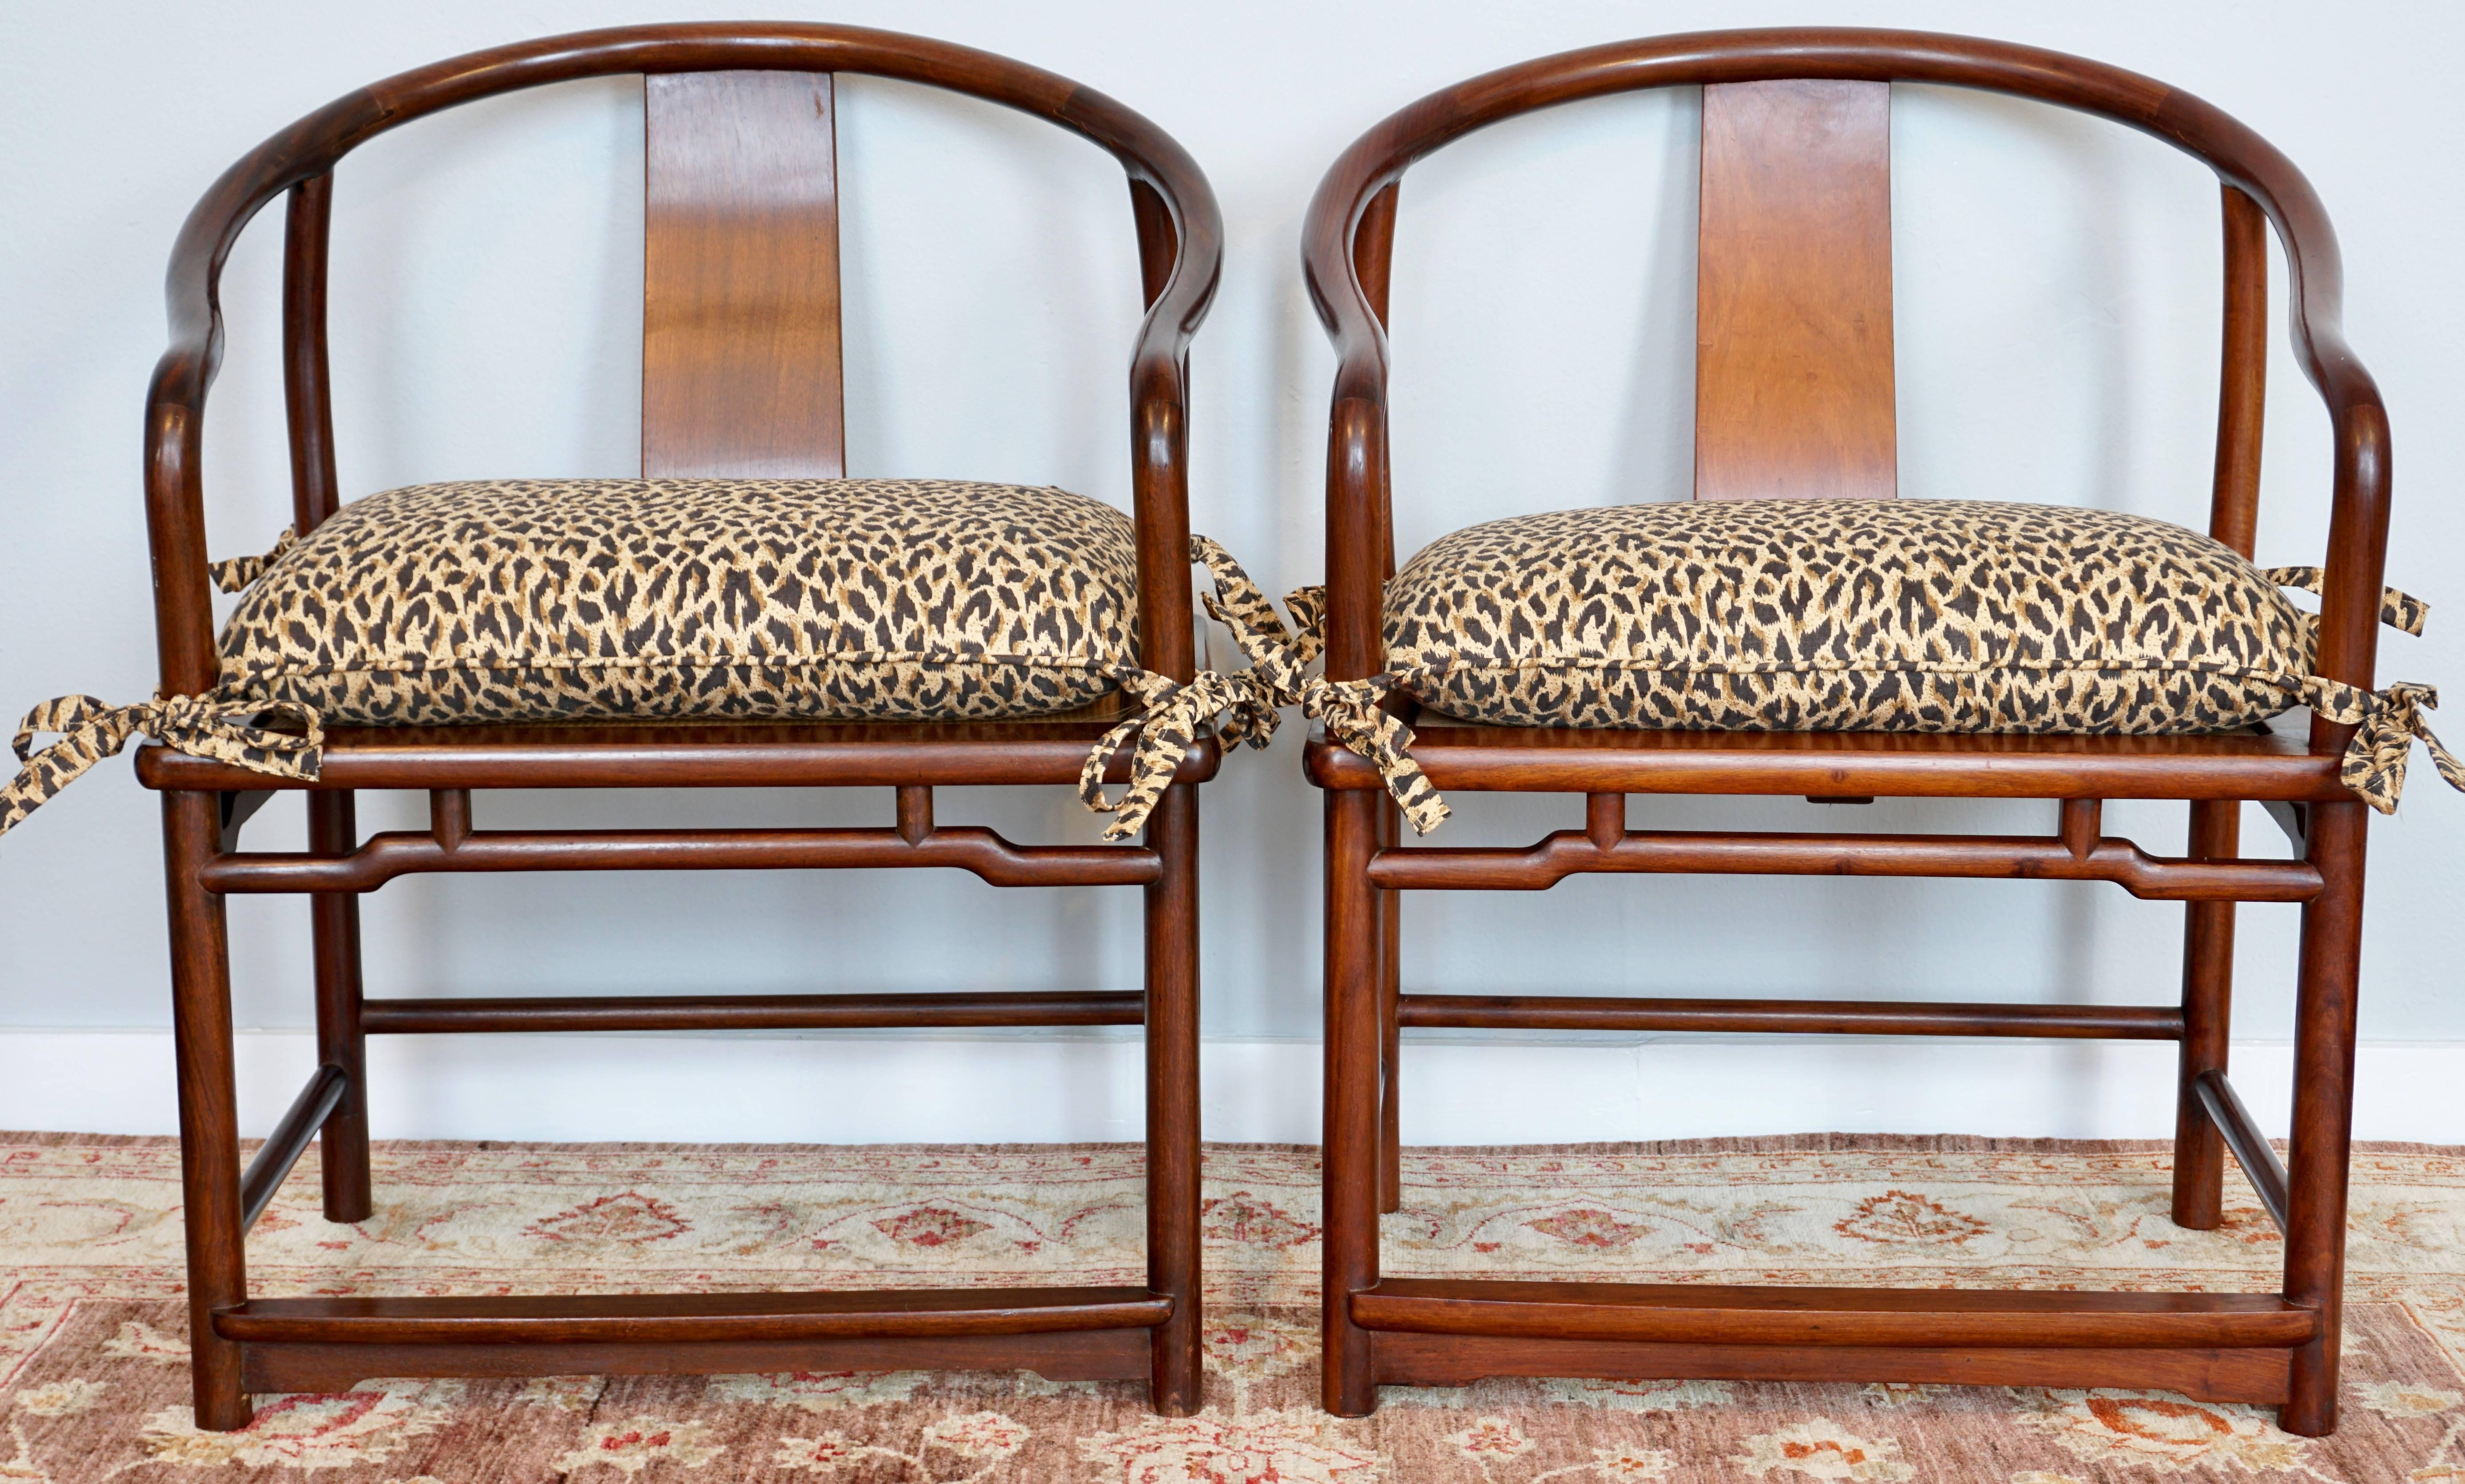 Mid-Century Modern Huanghuali Chinese rosewood side armchairs in a horse shoe pattern. Hardwood yellow rosewood of newer generation Huanghuali manufactured in Honk Kong in the late 1950s or 1960s. 

From the estate of Betty Gertz acquired by her